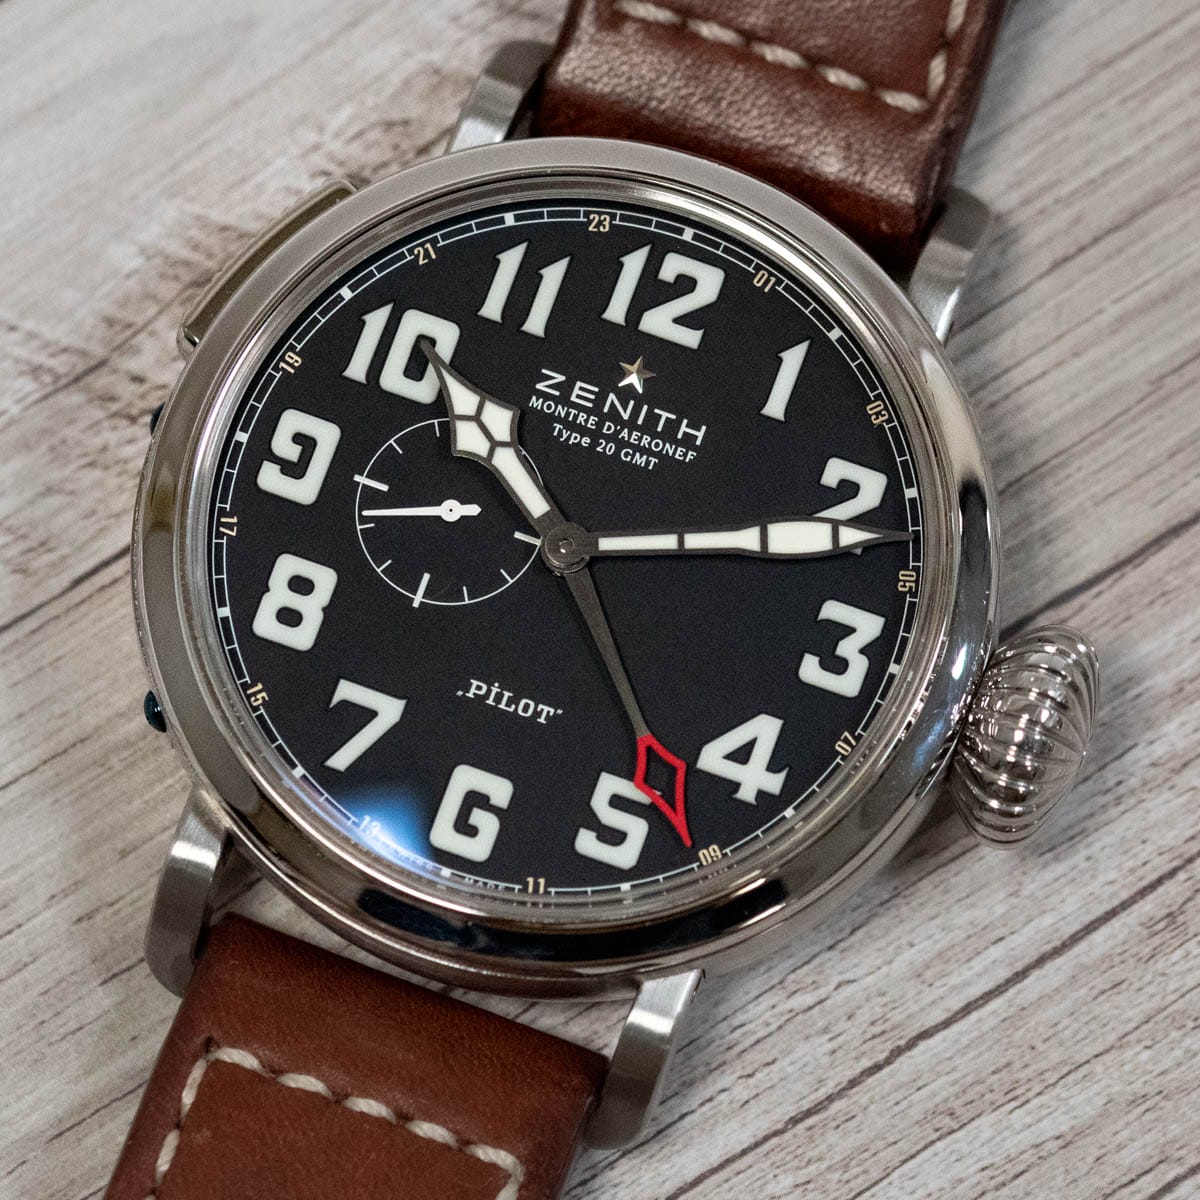 Stylied photo of  of Elite Pilot Type 20 GMT